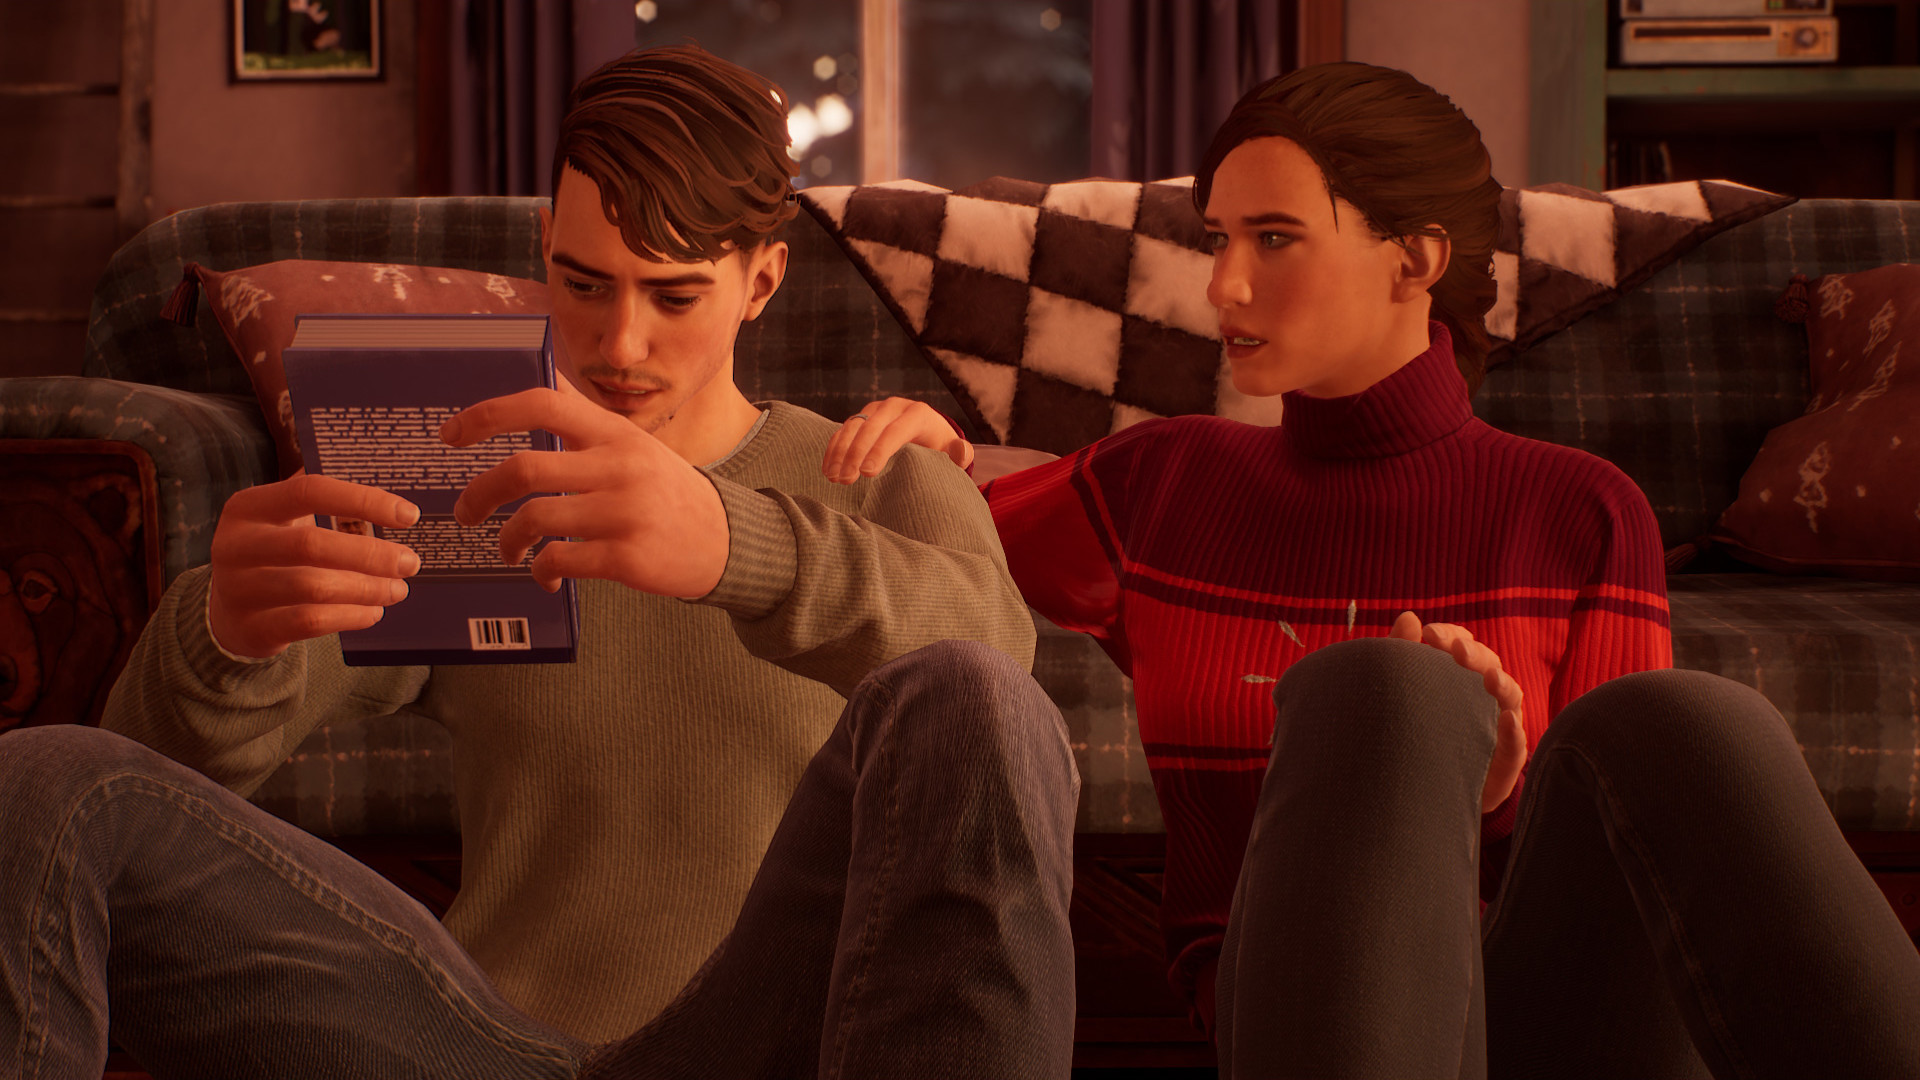 Tyler and his sister both in sweaters and jeans sitting on the floor in front of a couch. Tyler is looking at a book he's holding and his sister has her hand on his shoulder.